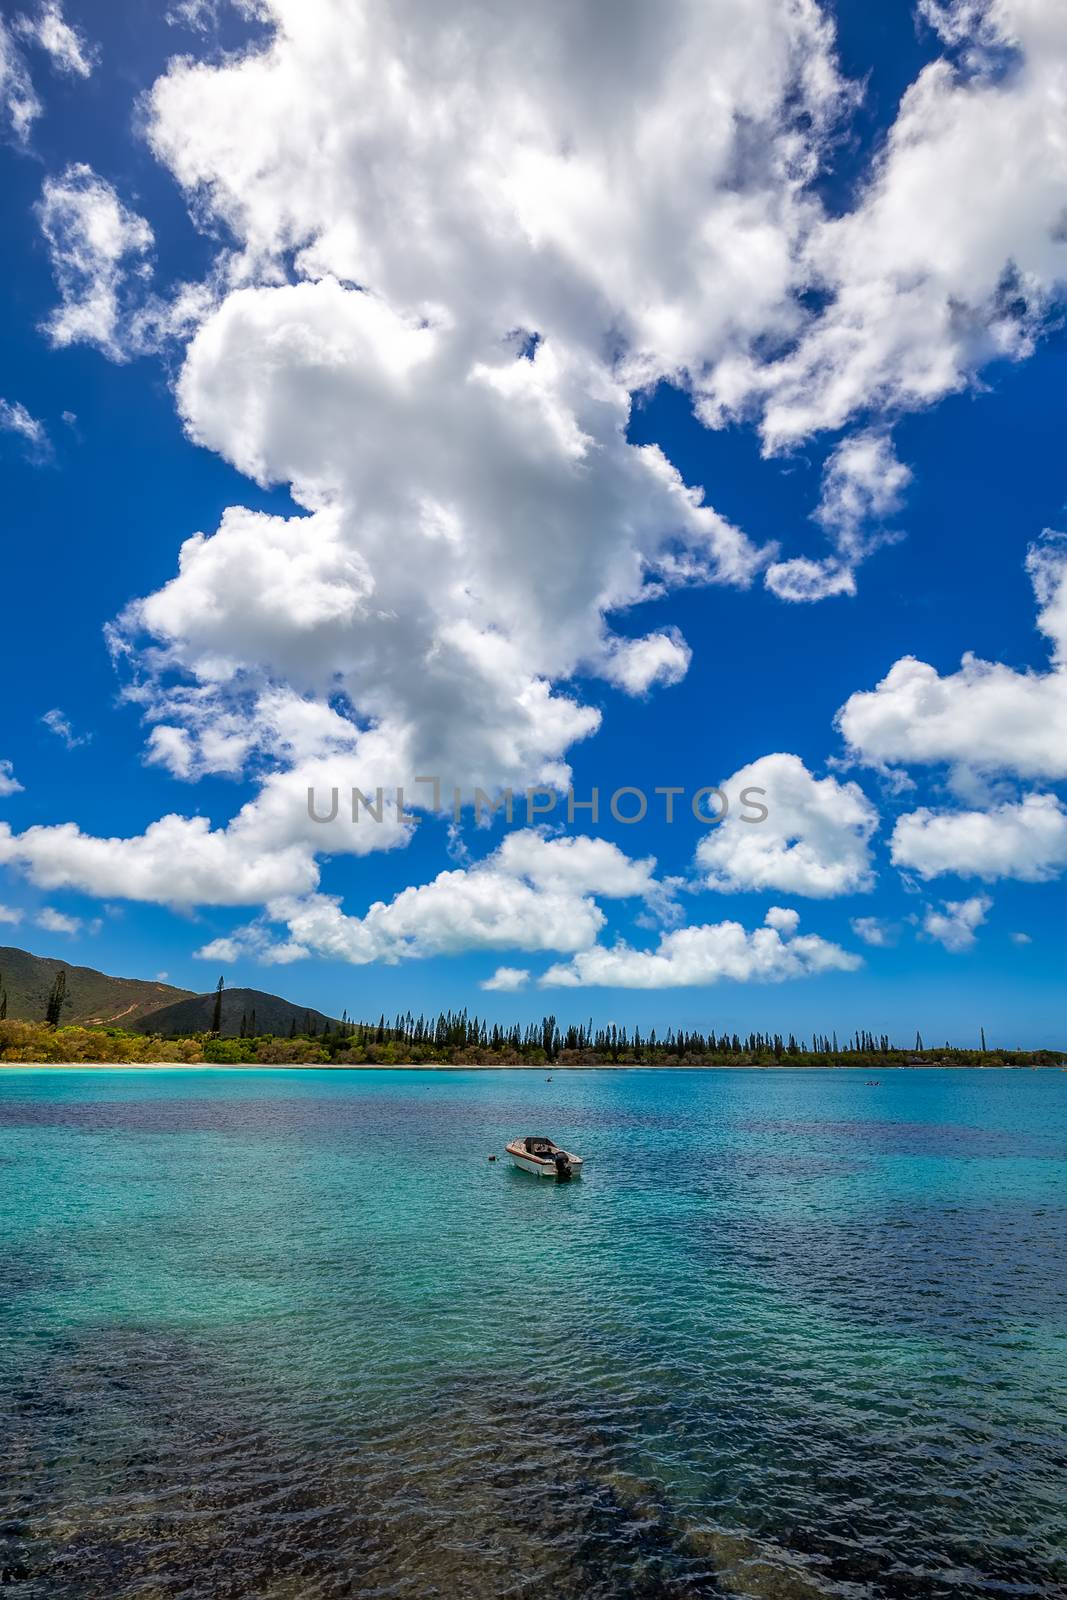 Fishing boat anchored by a tropical island with blue sky and white clouds in the background.